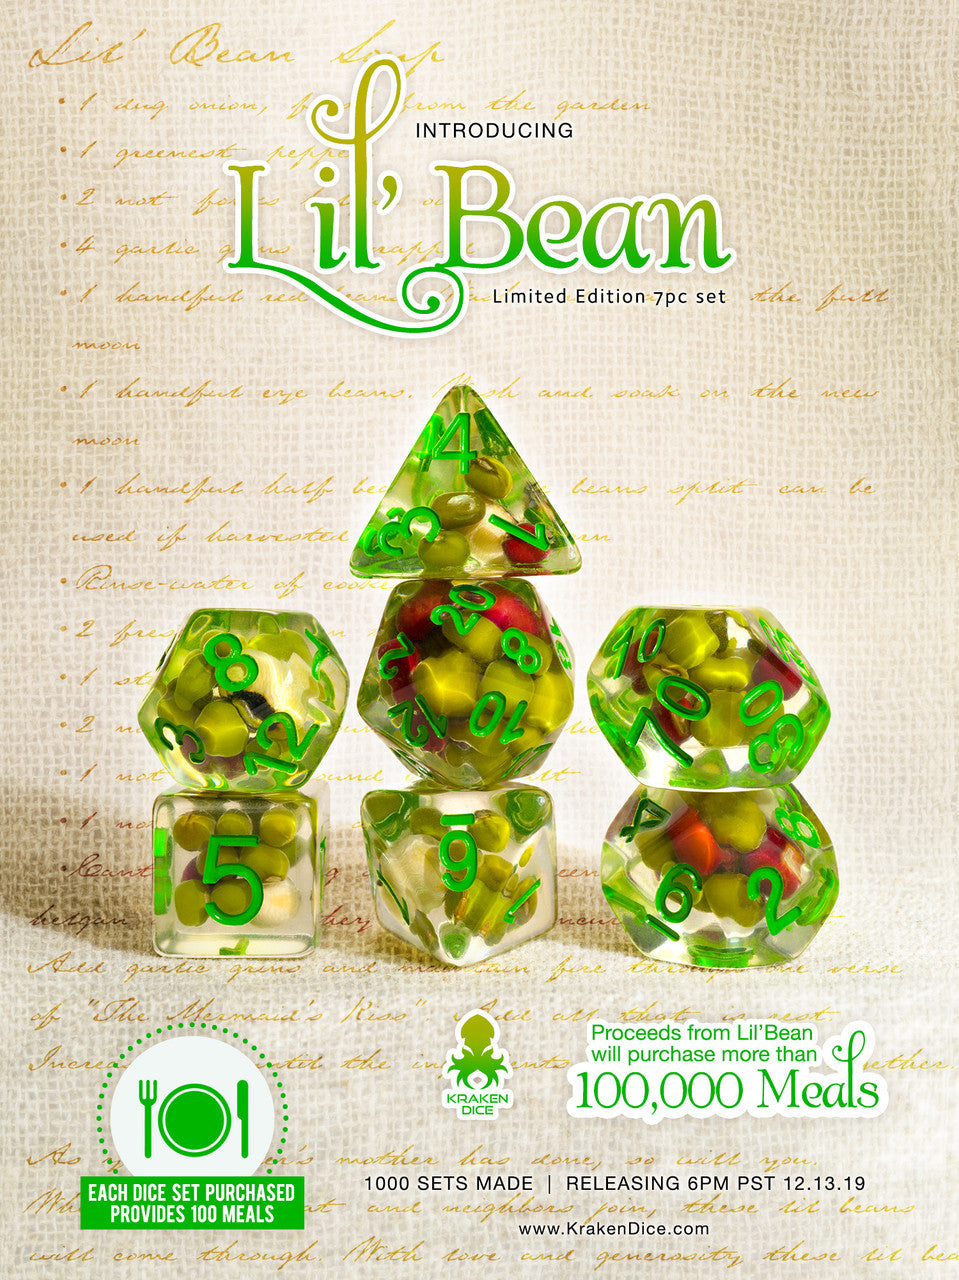 Lil' Bean 7pc RPG Dice Set with Green Ink